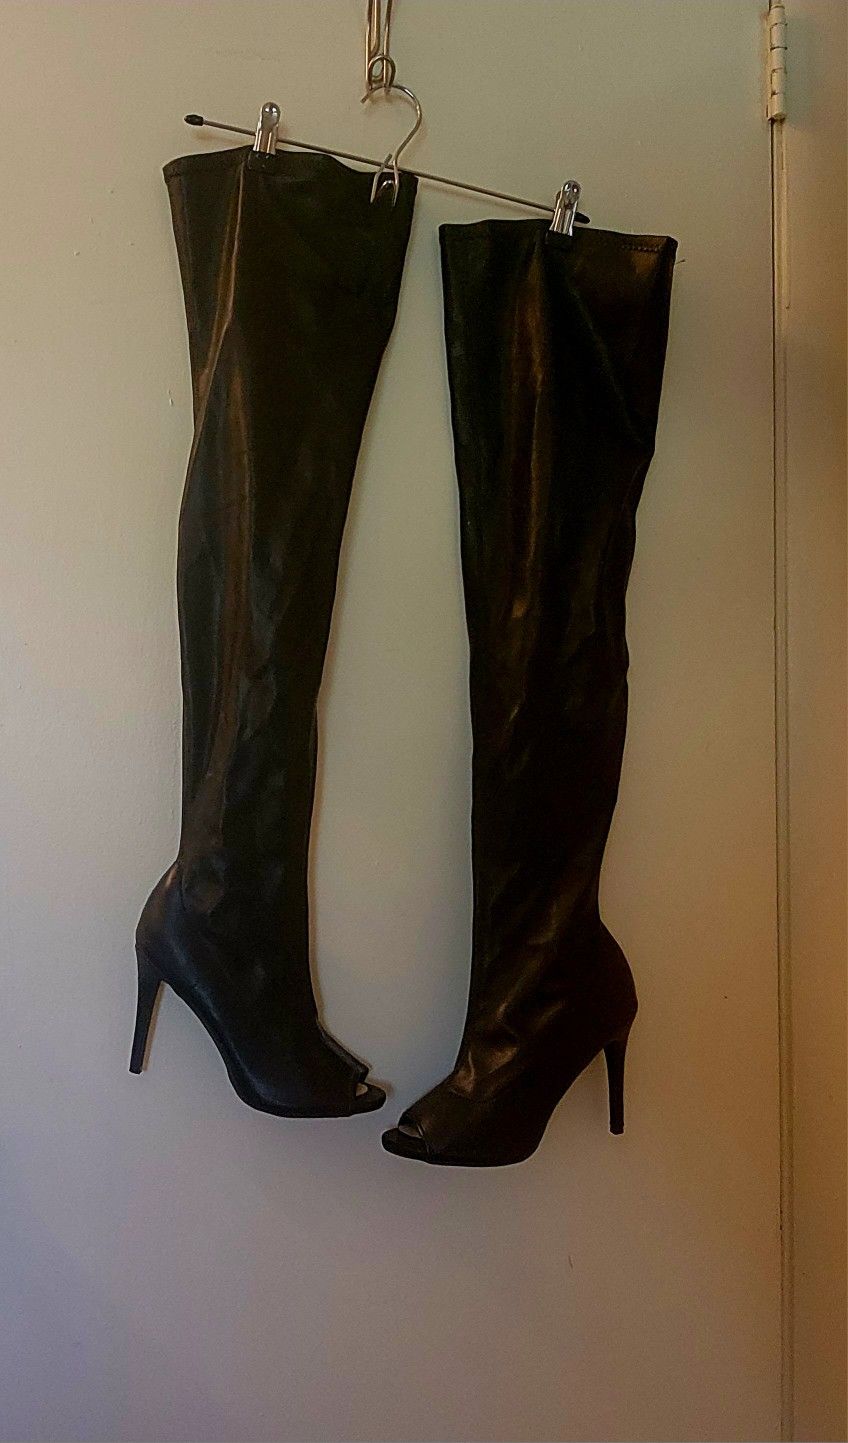 Thigh High Peep Toes Boots